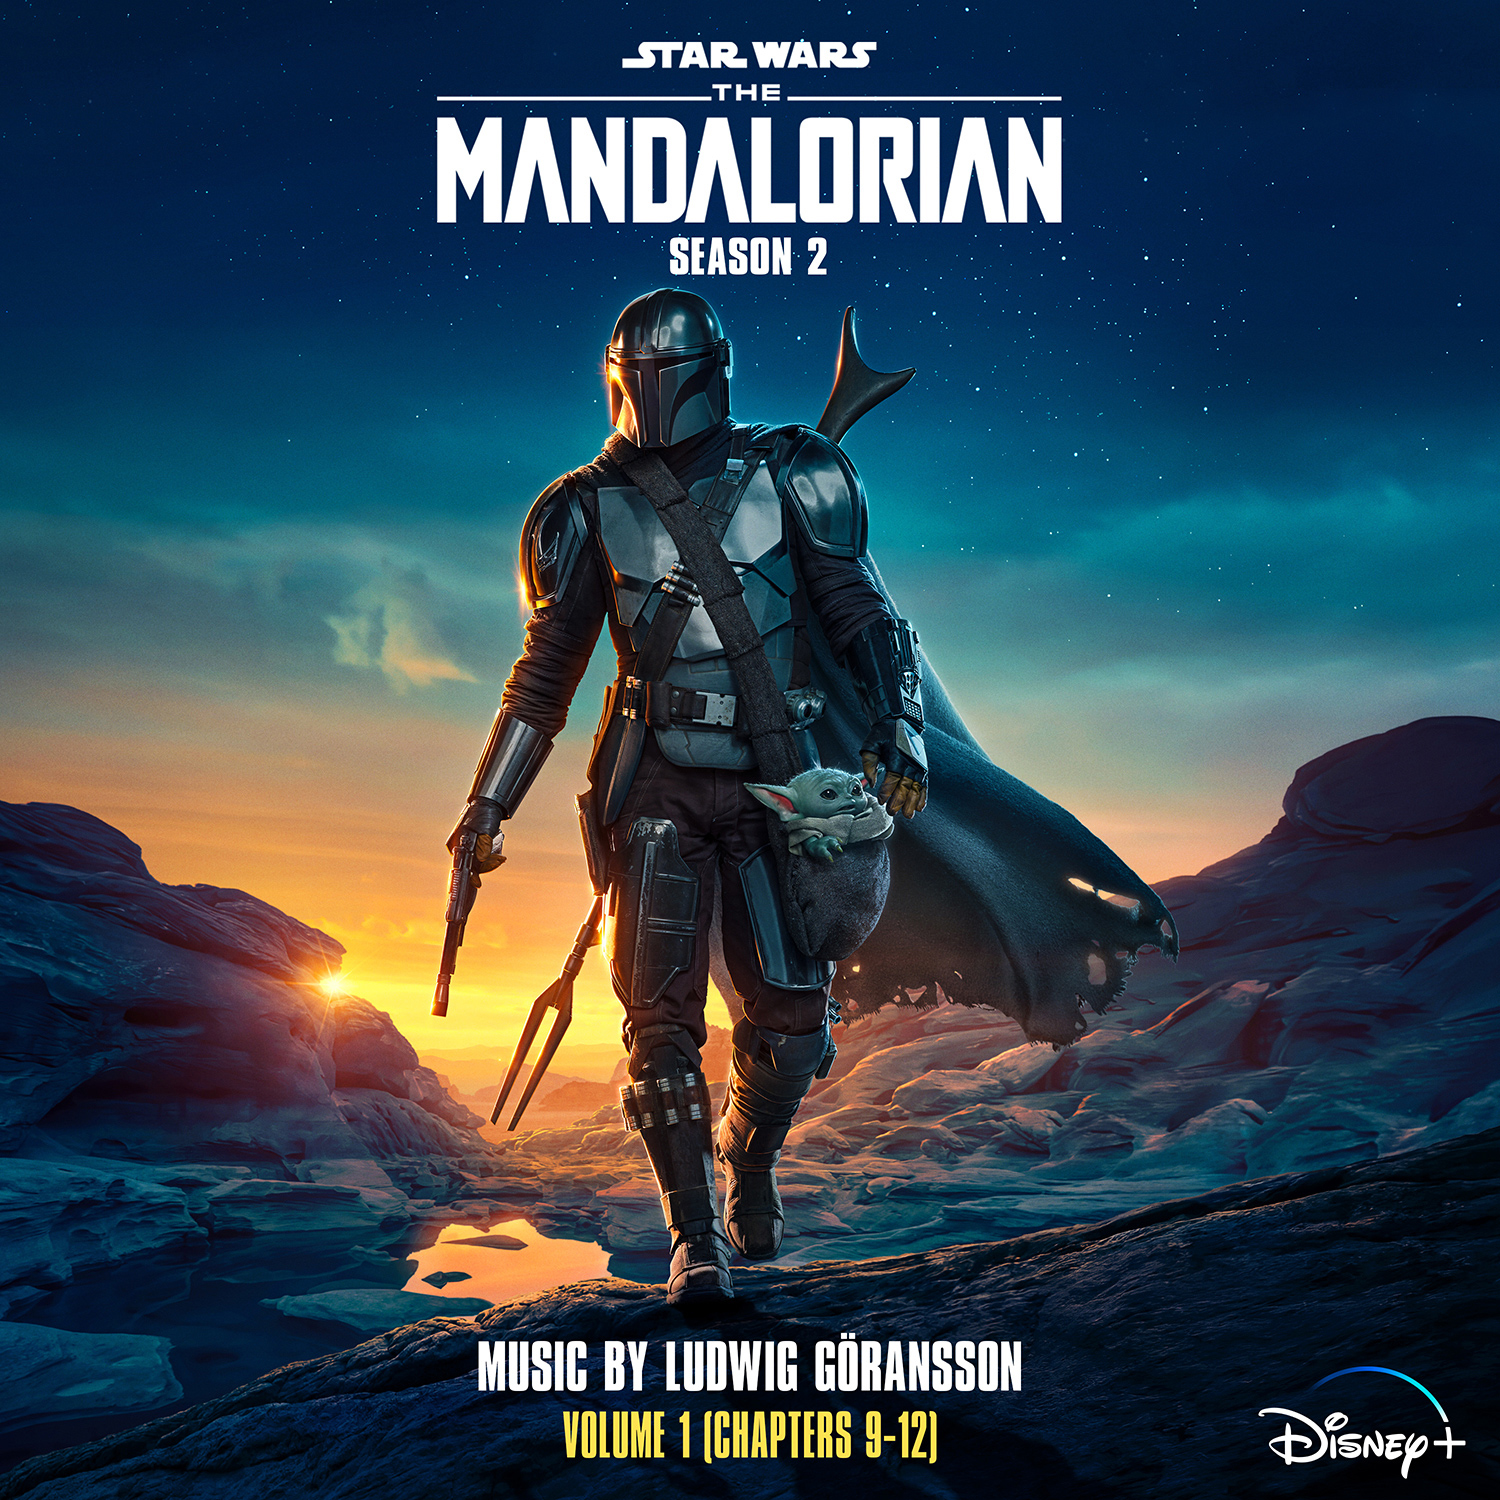 The Mandalorian Season 2 Vol 1 Soundtrack Is Out With Vol 2 Coming Soon